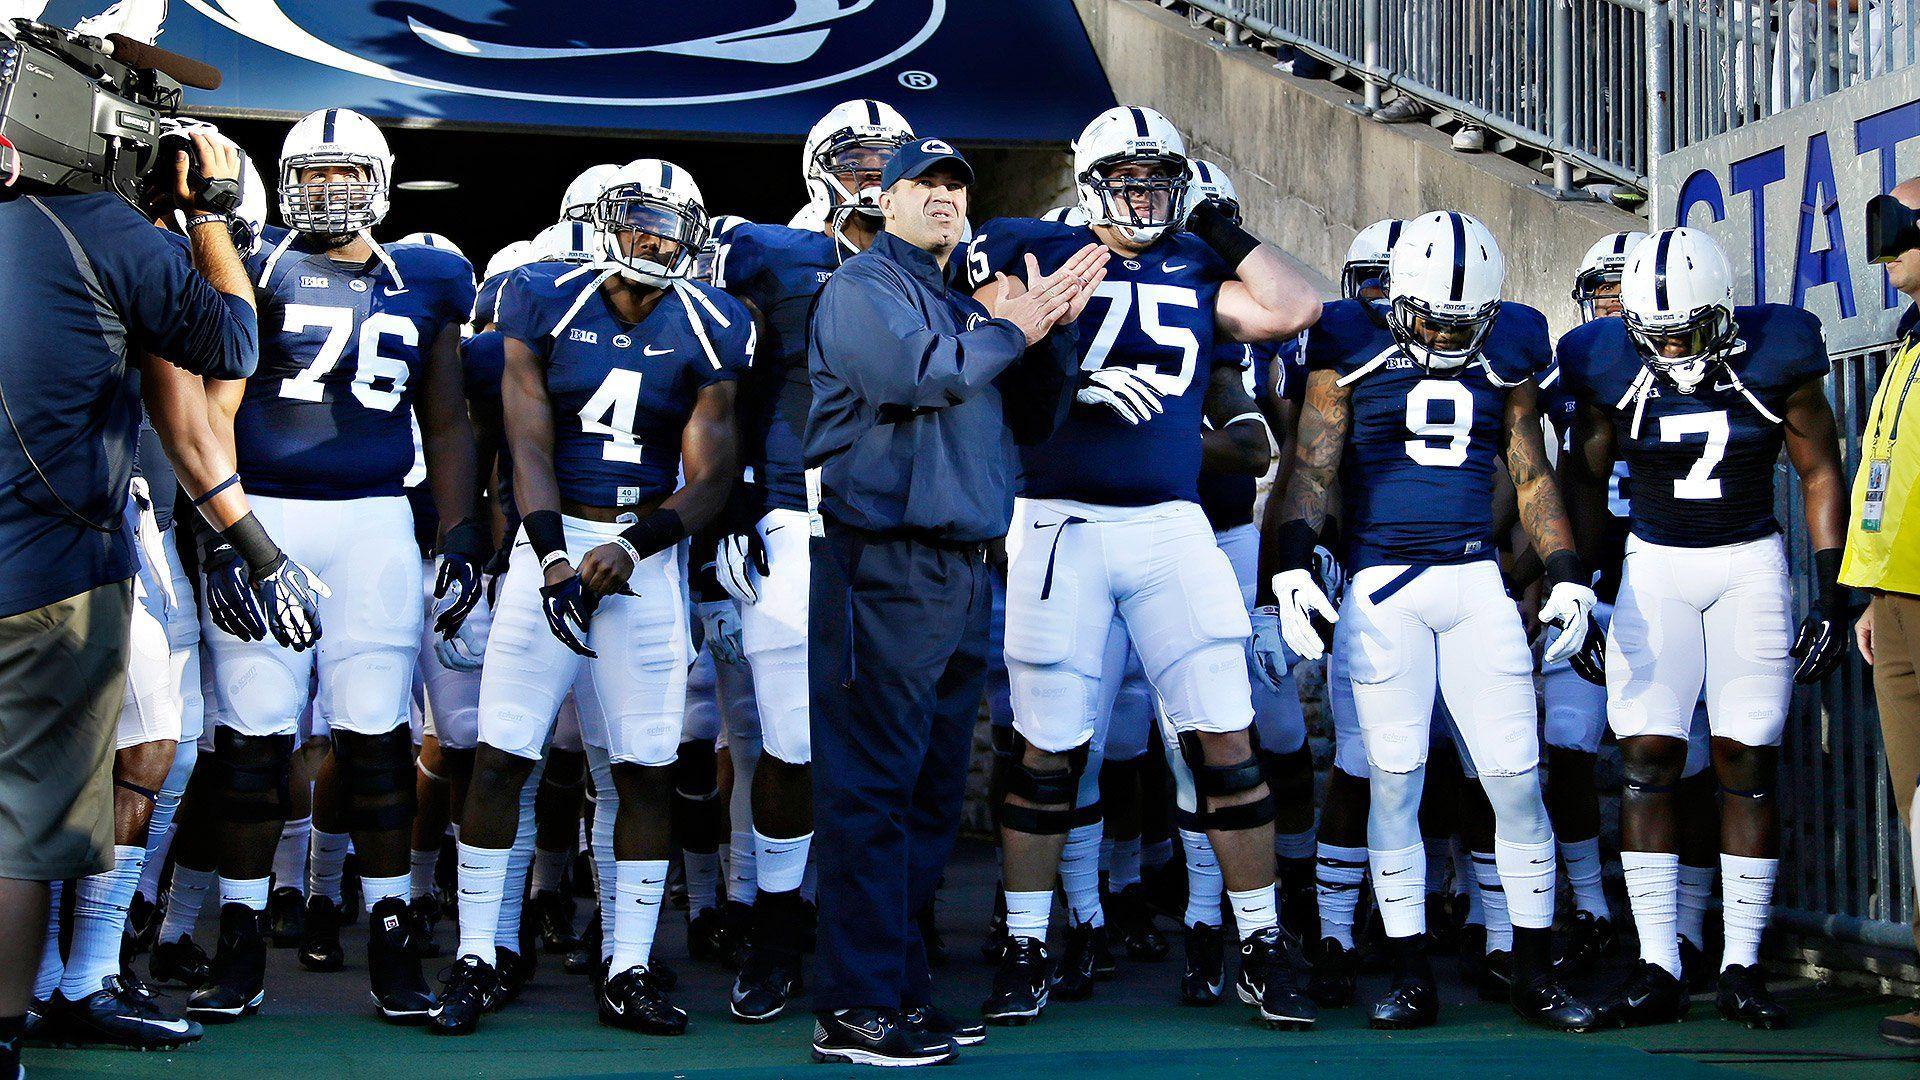 Wallpapers and Backgrounds  Penn State Athletics